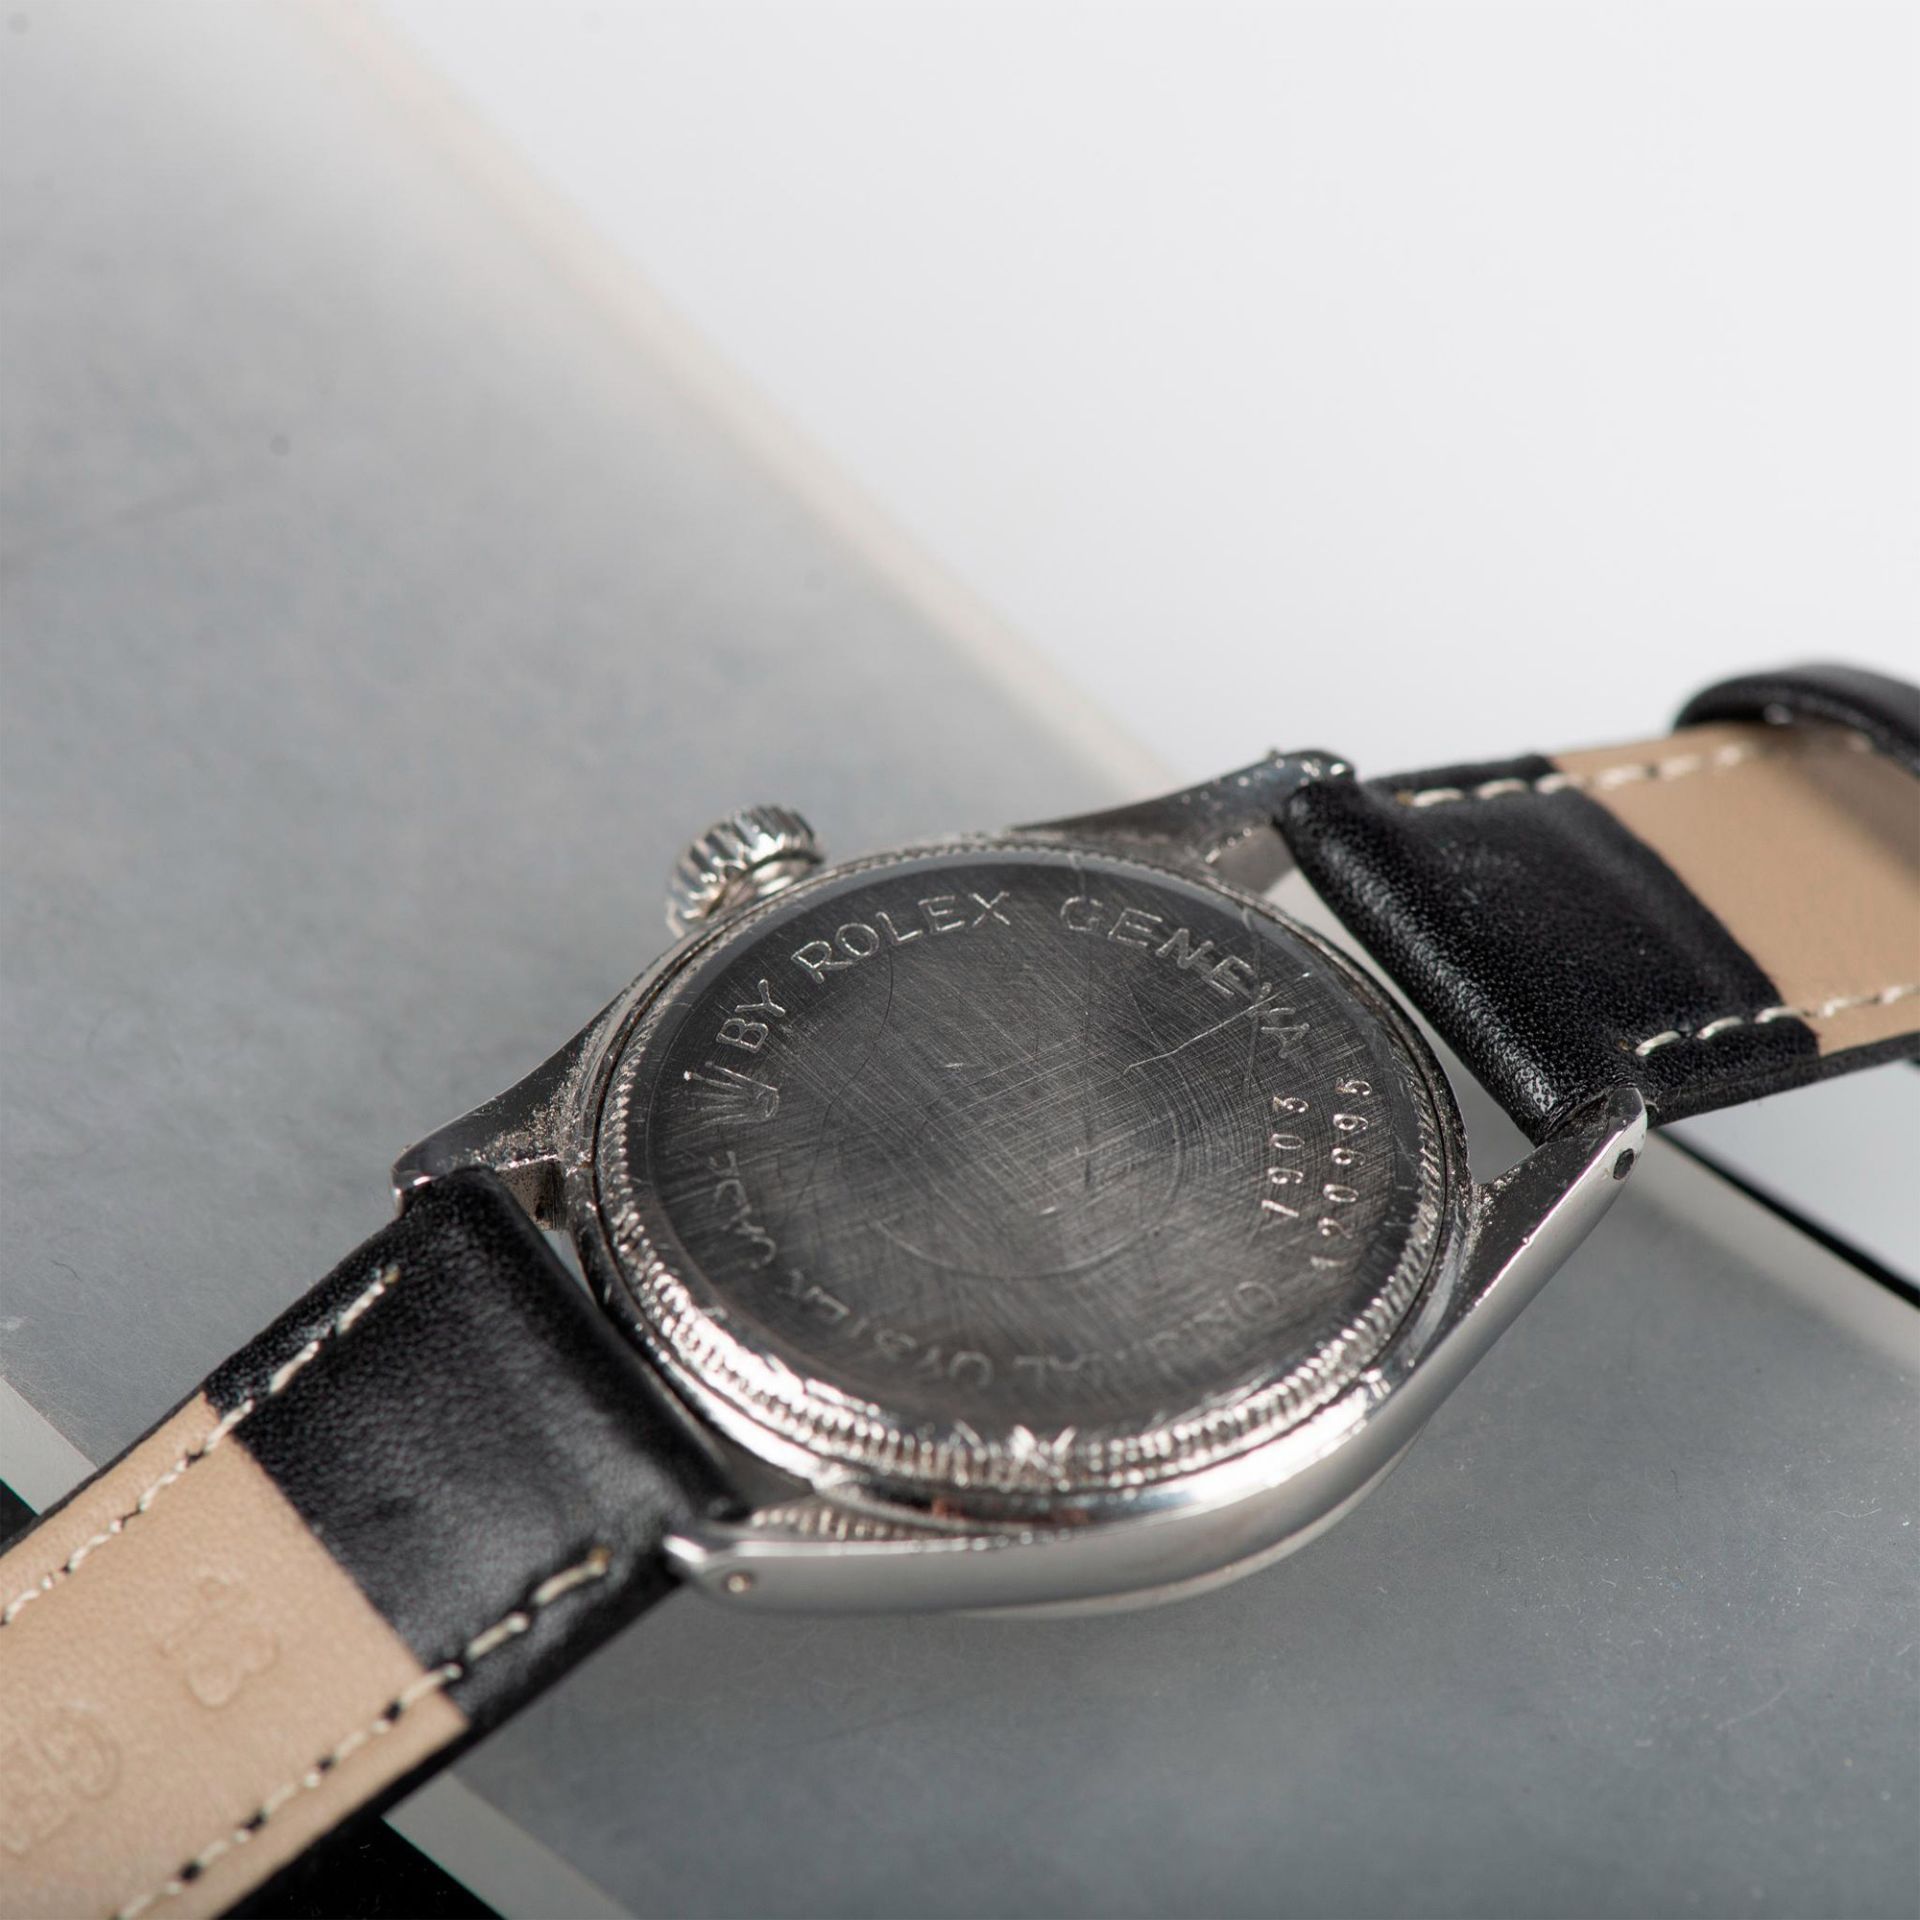 Vintage 1950s Tudor Oyster Manual Watch, 7903 - Image 5 of 10